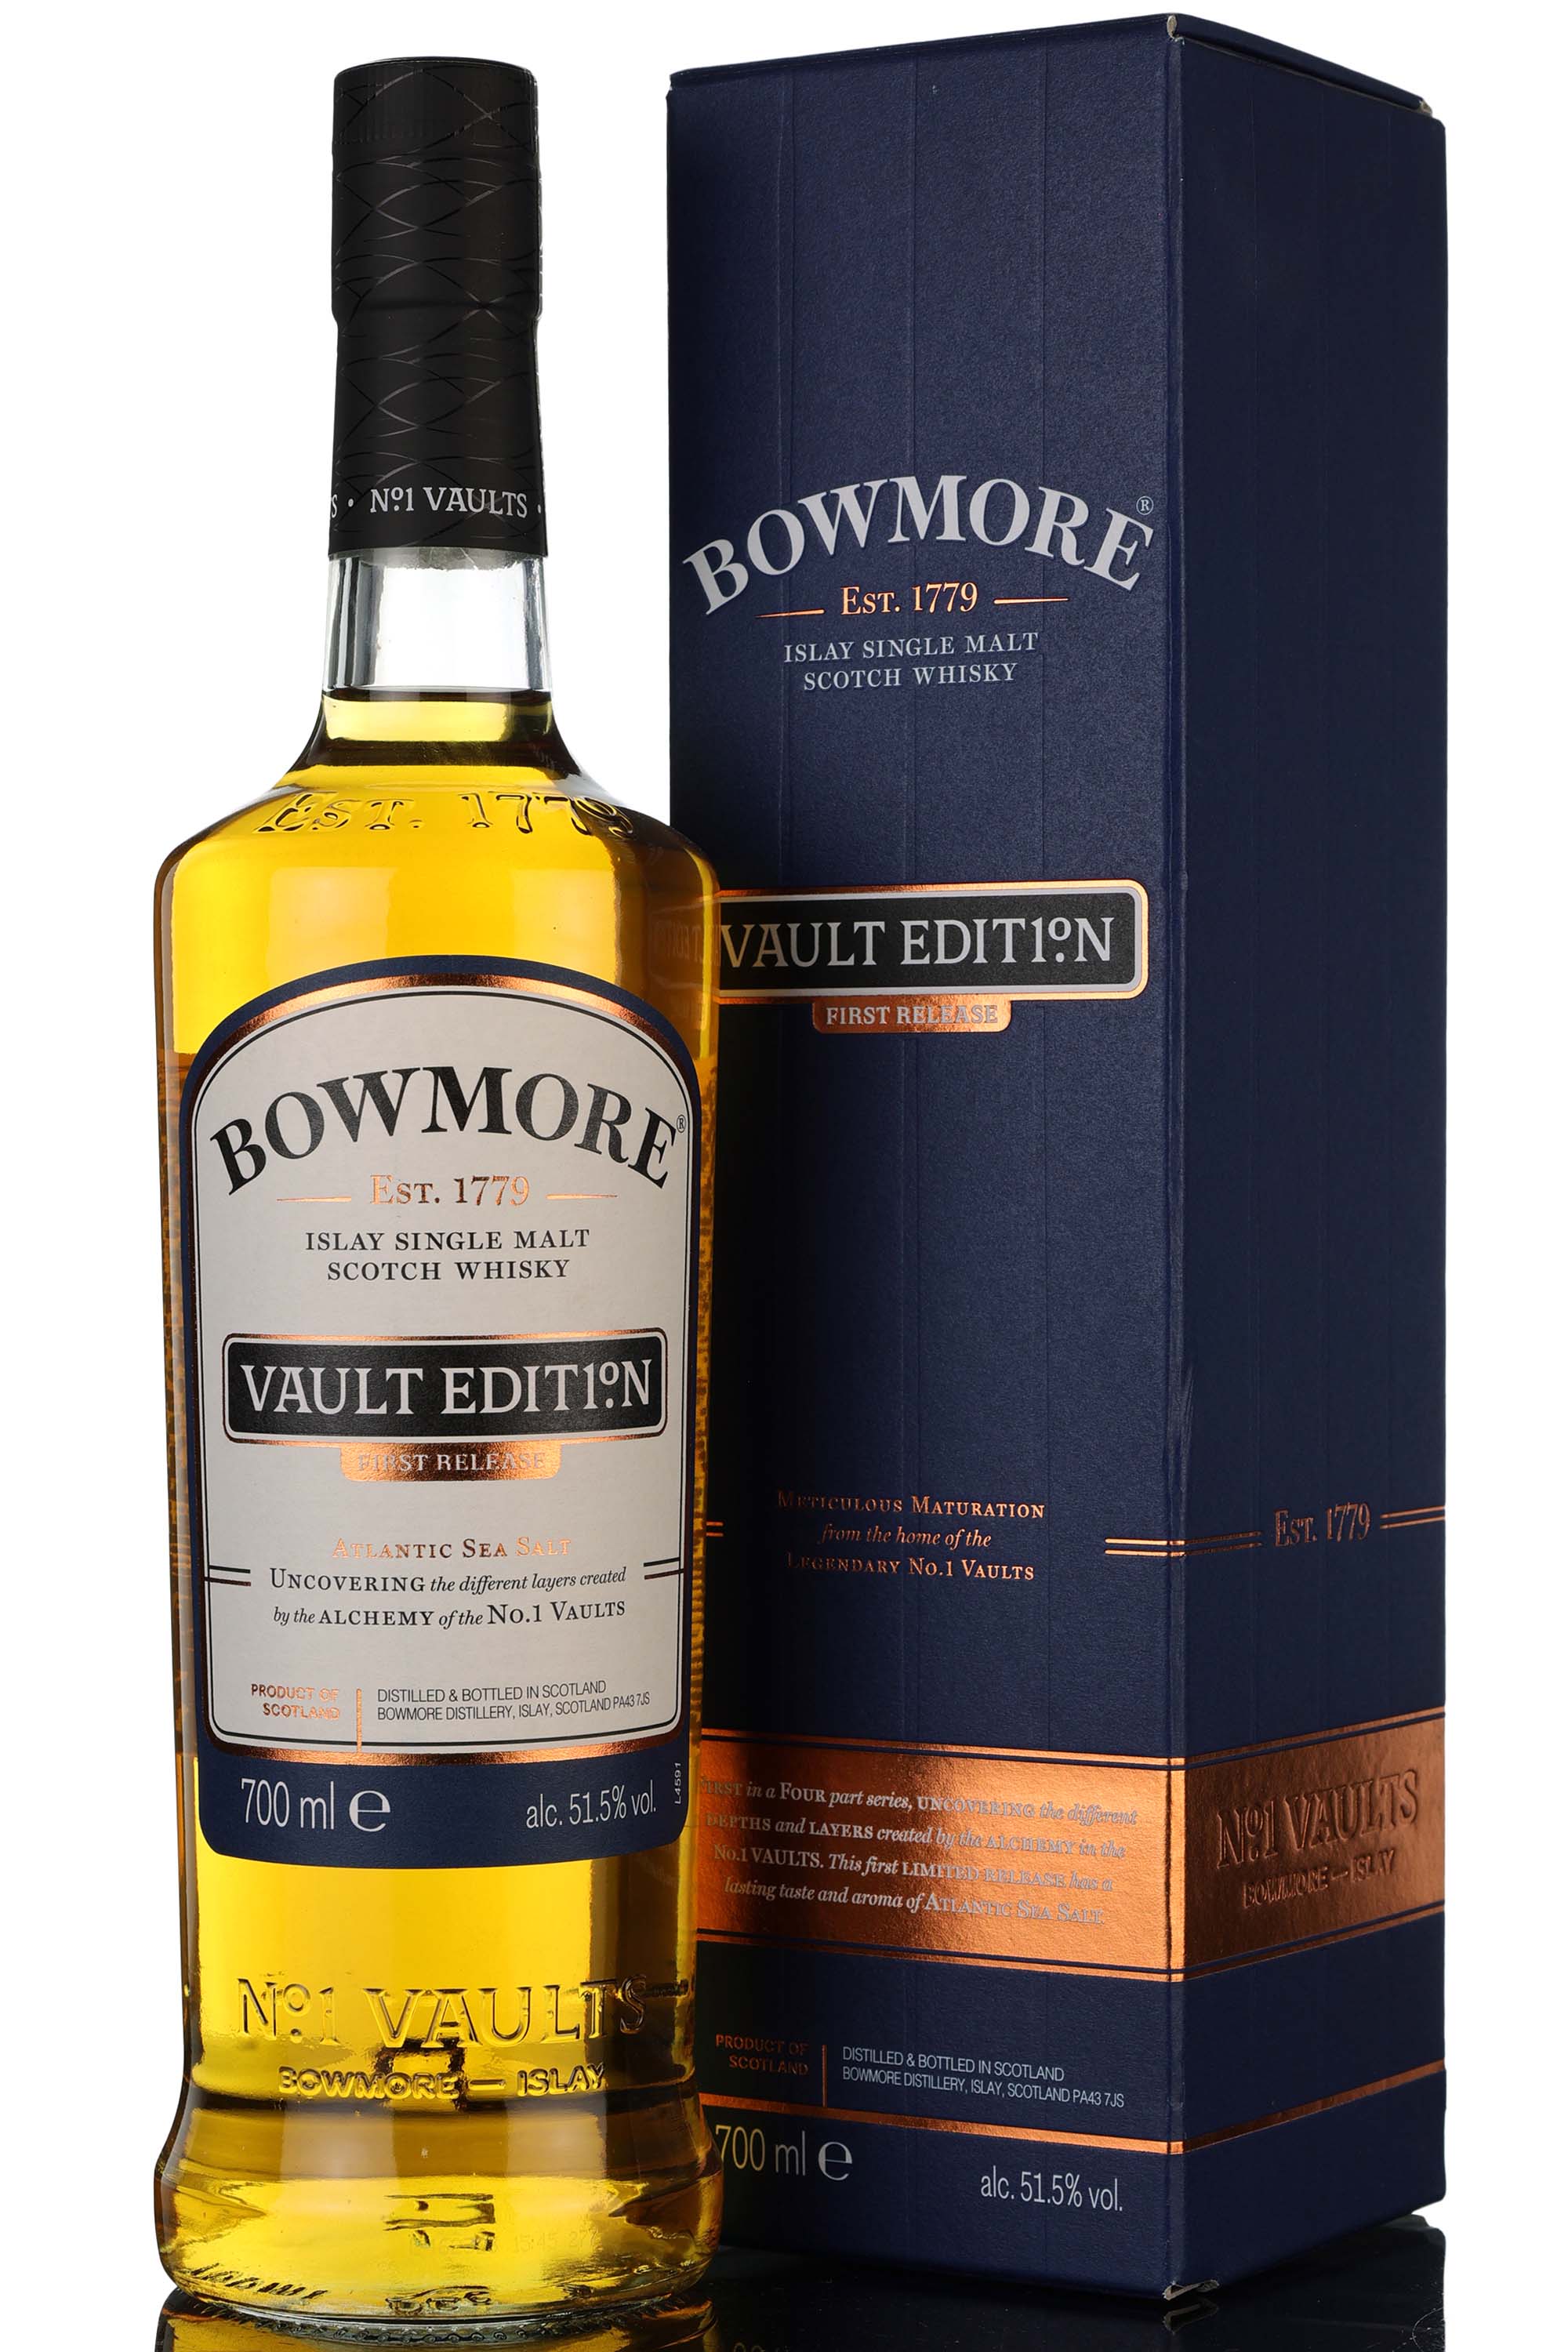 Bowmore Vault Edition - First Release 2016